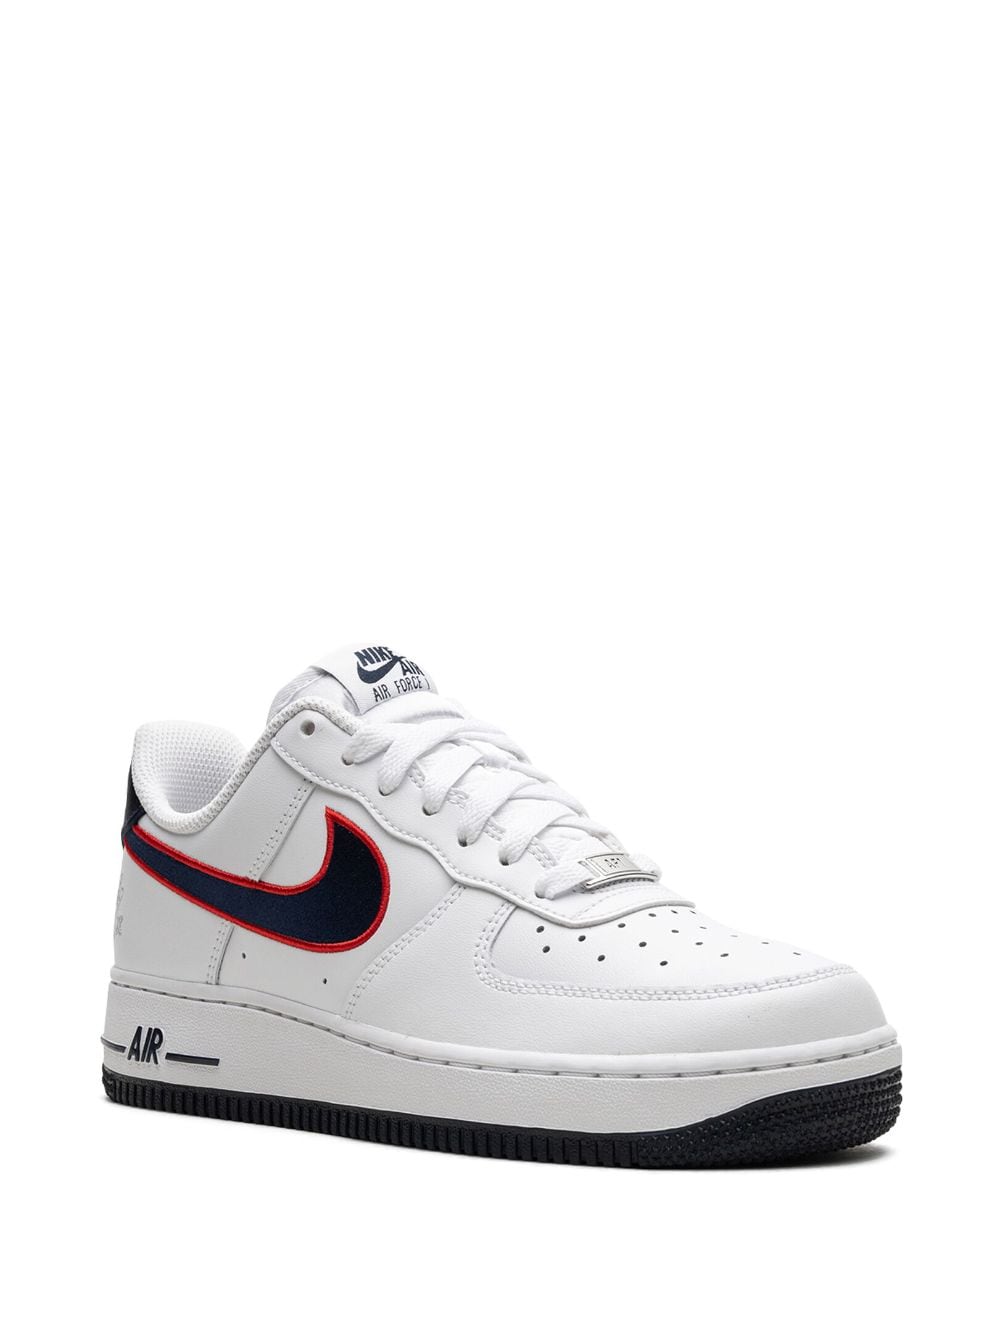 Air Force One Houston Comets Four-Peat